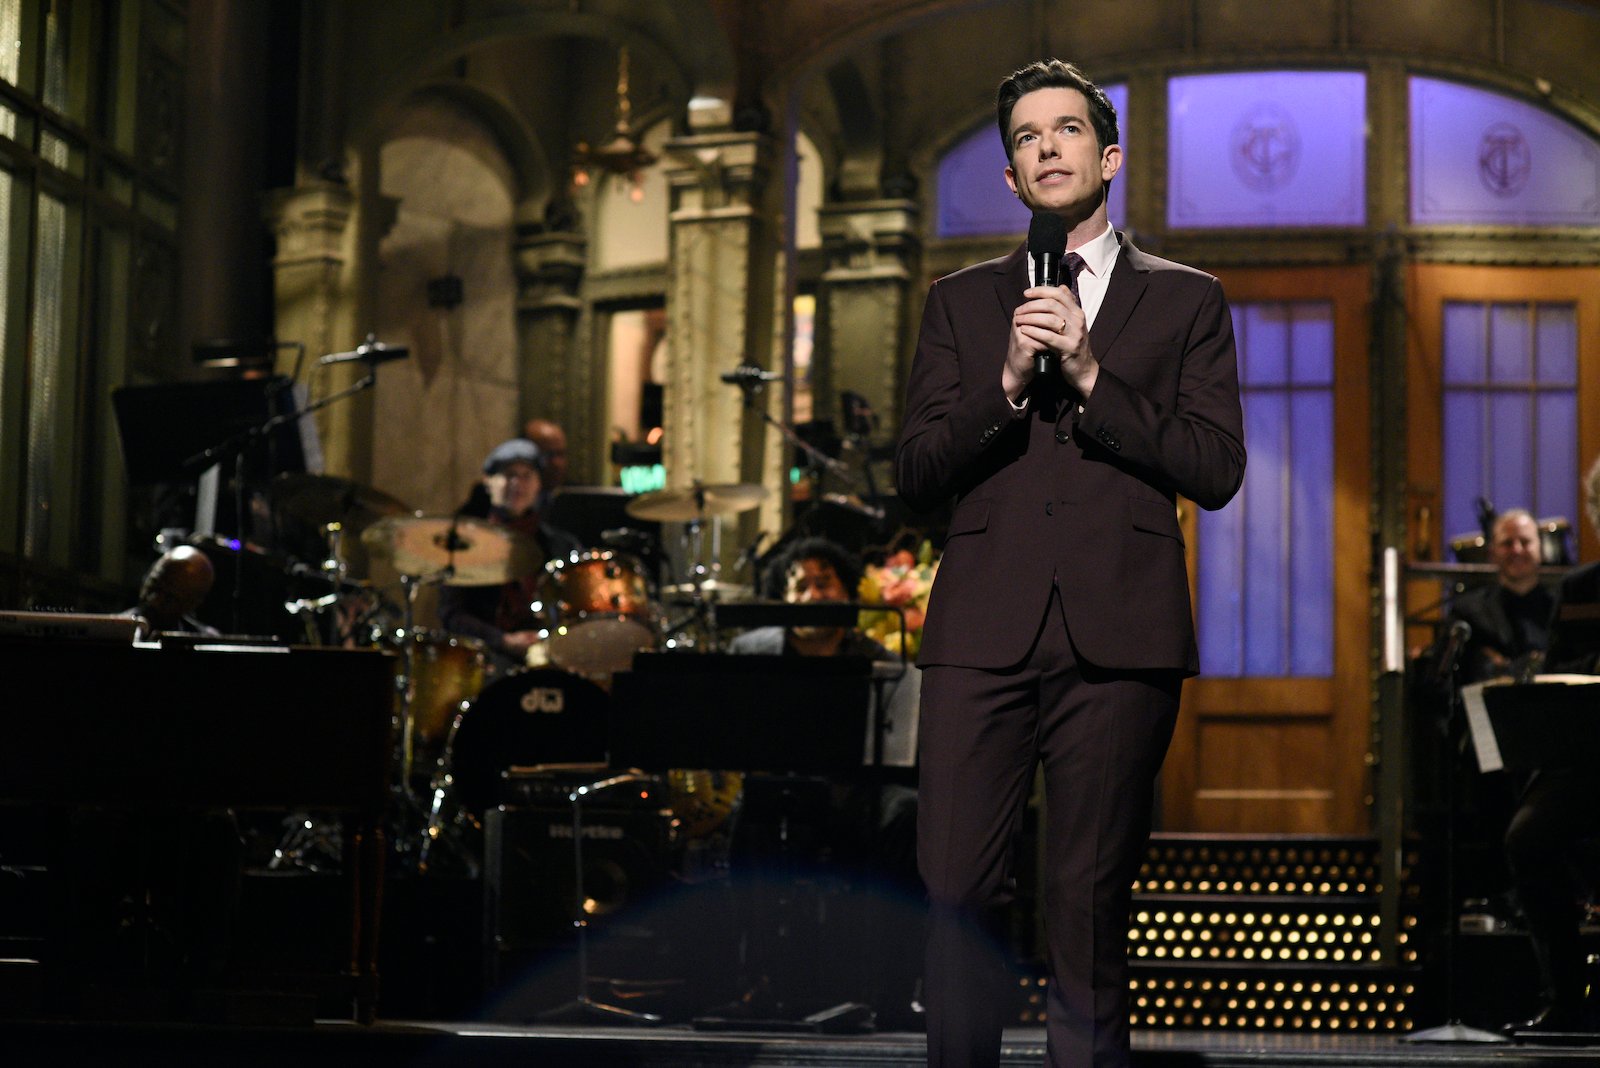 John Mulaney 'Street Smarts' bit was toned down for the audience